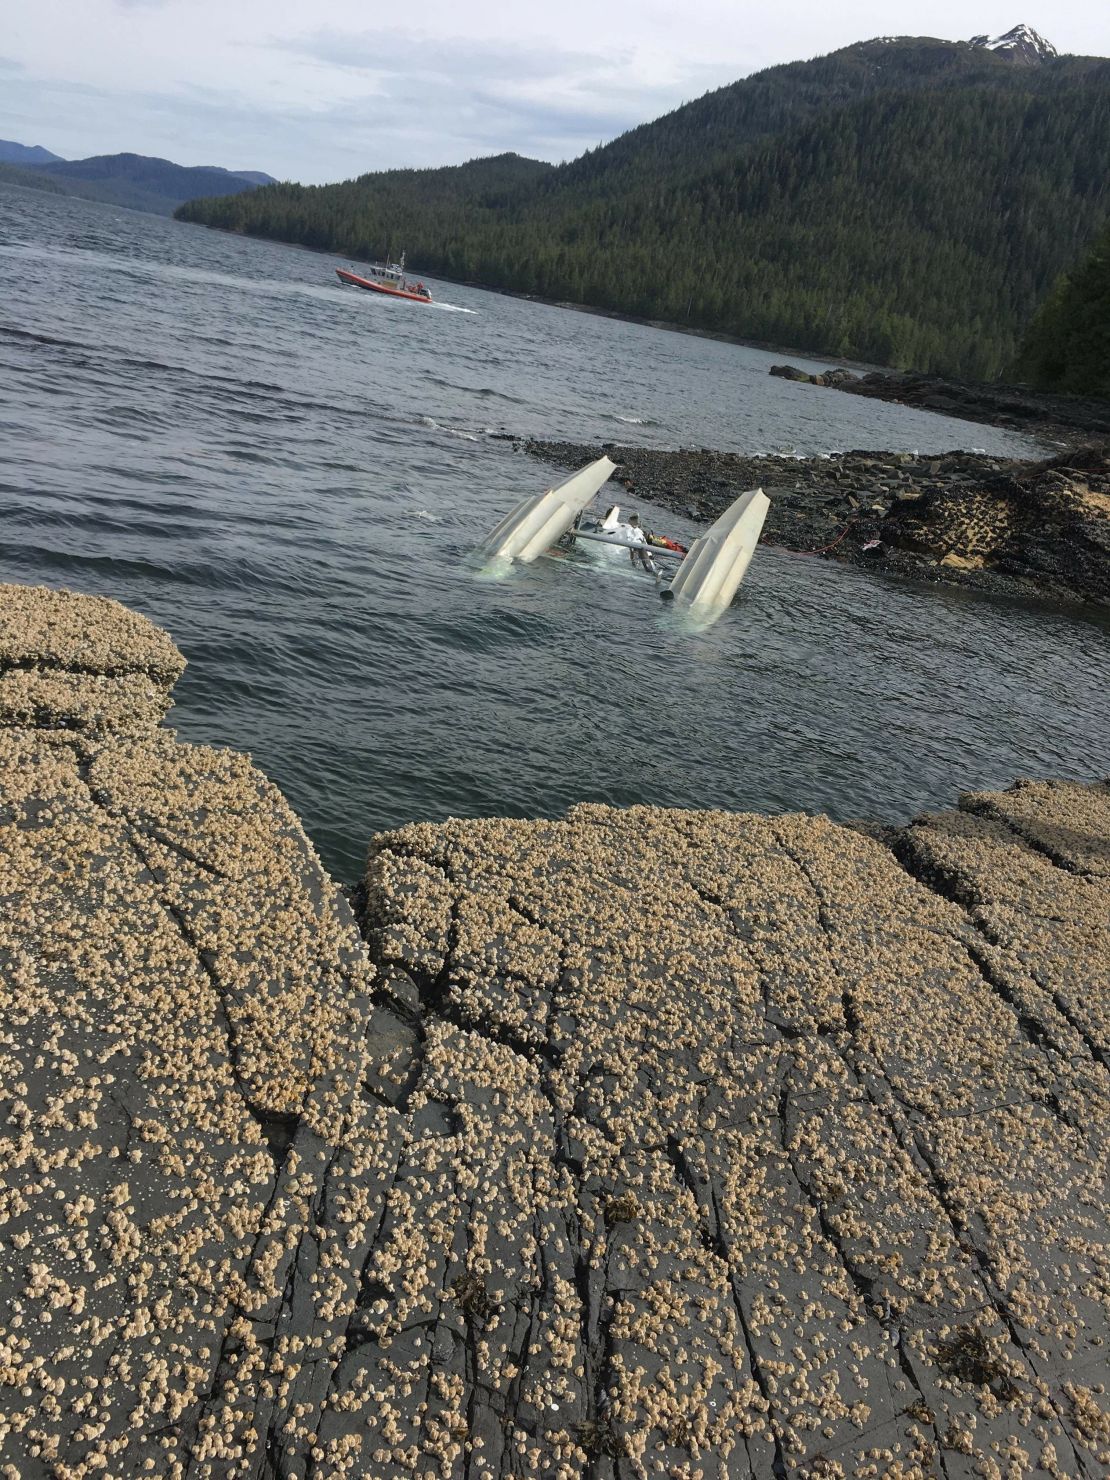 Wreckage from the mid-air collison of the two floatplanes. 